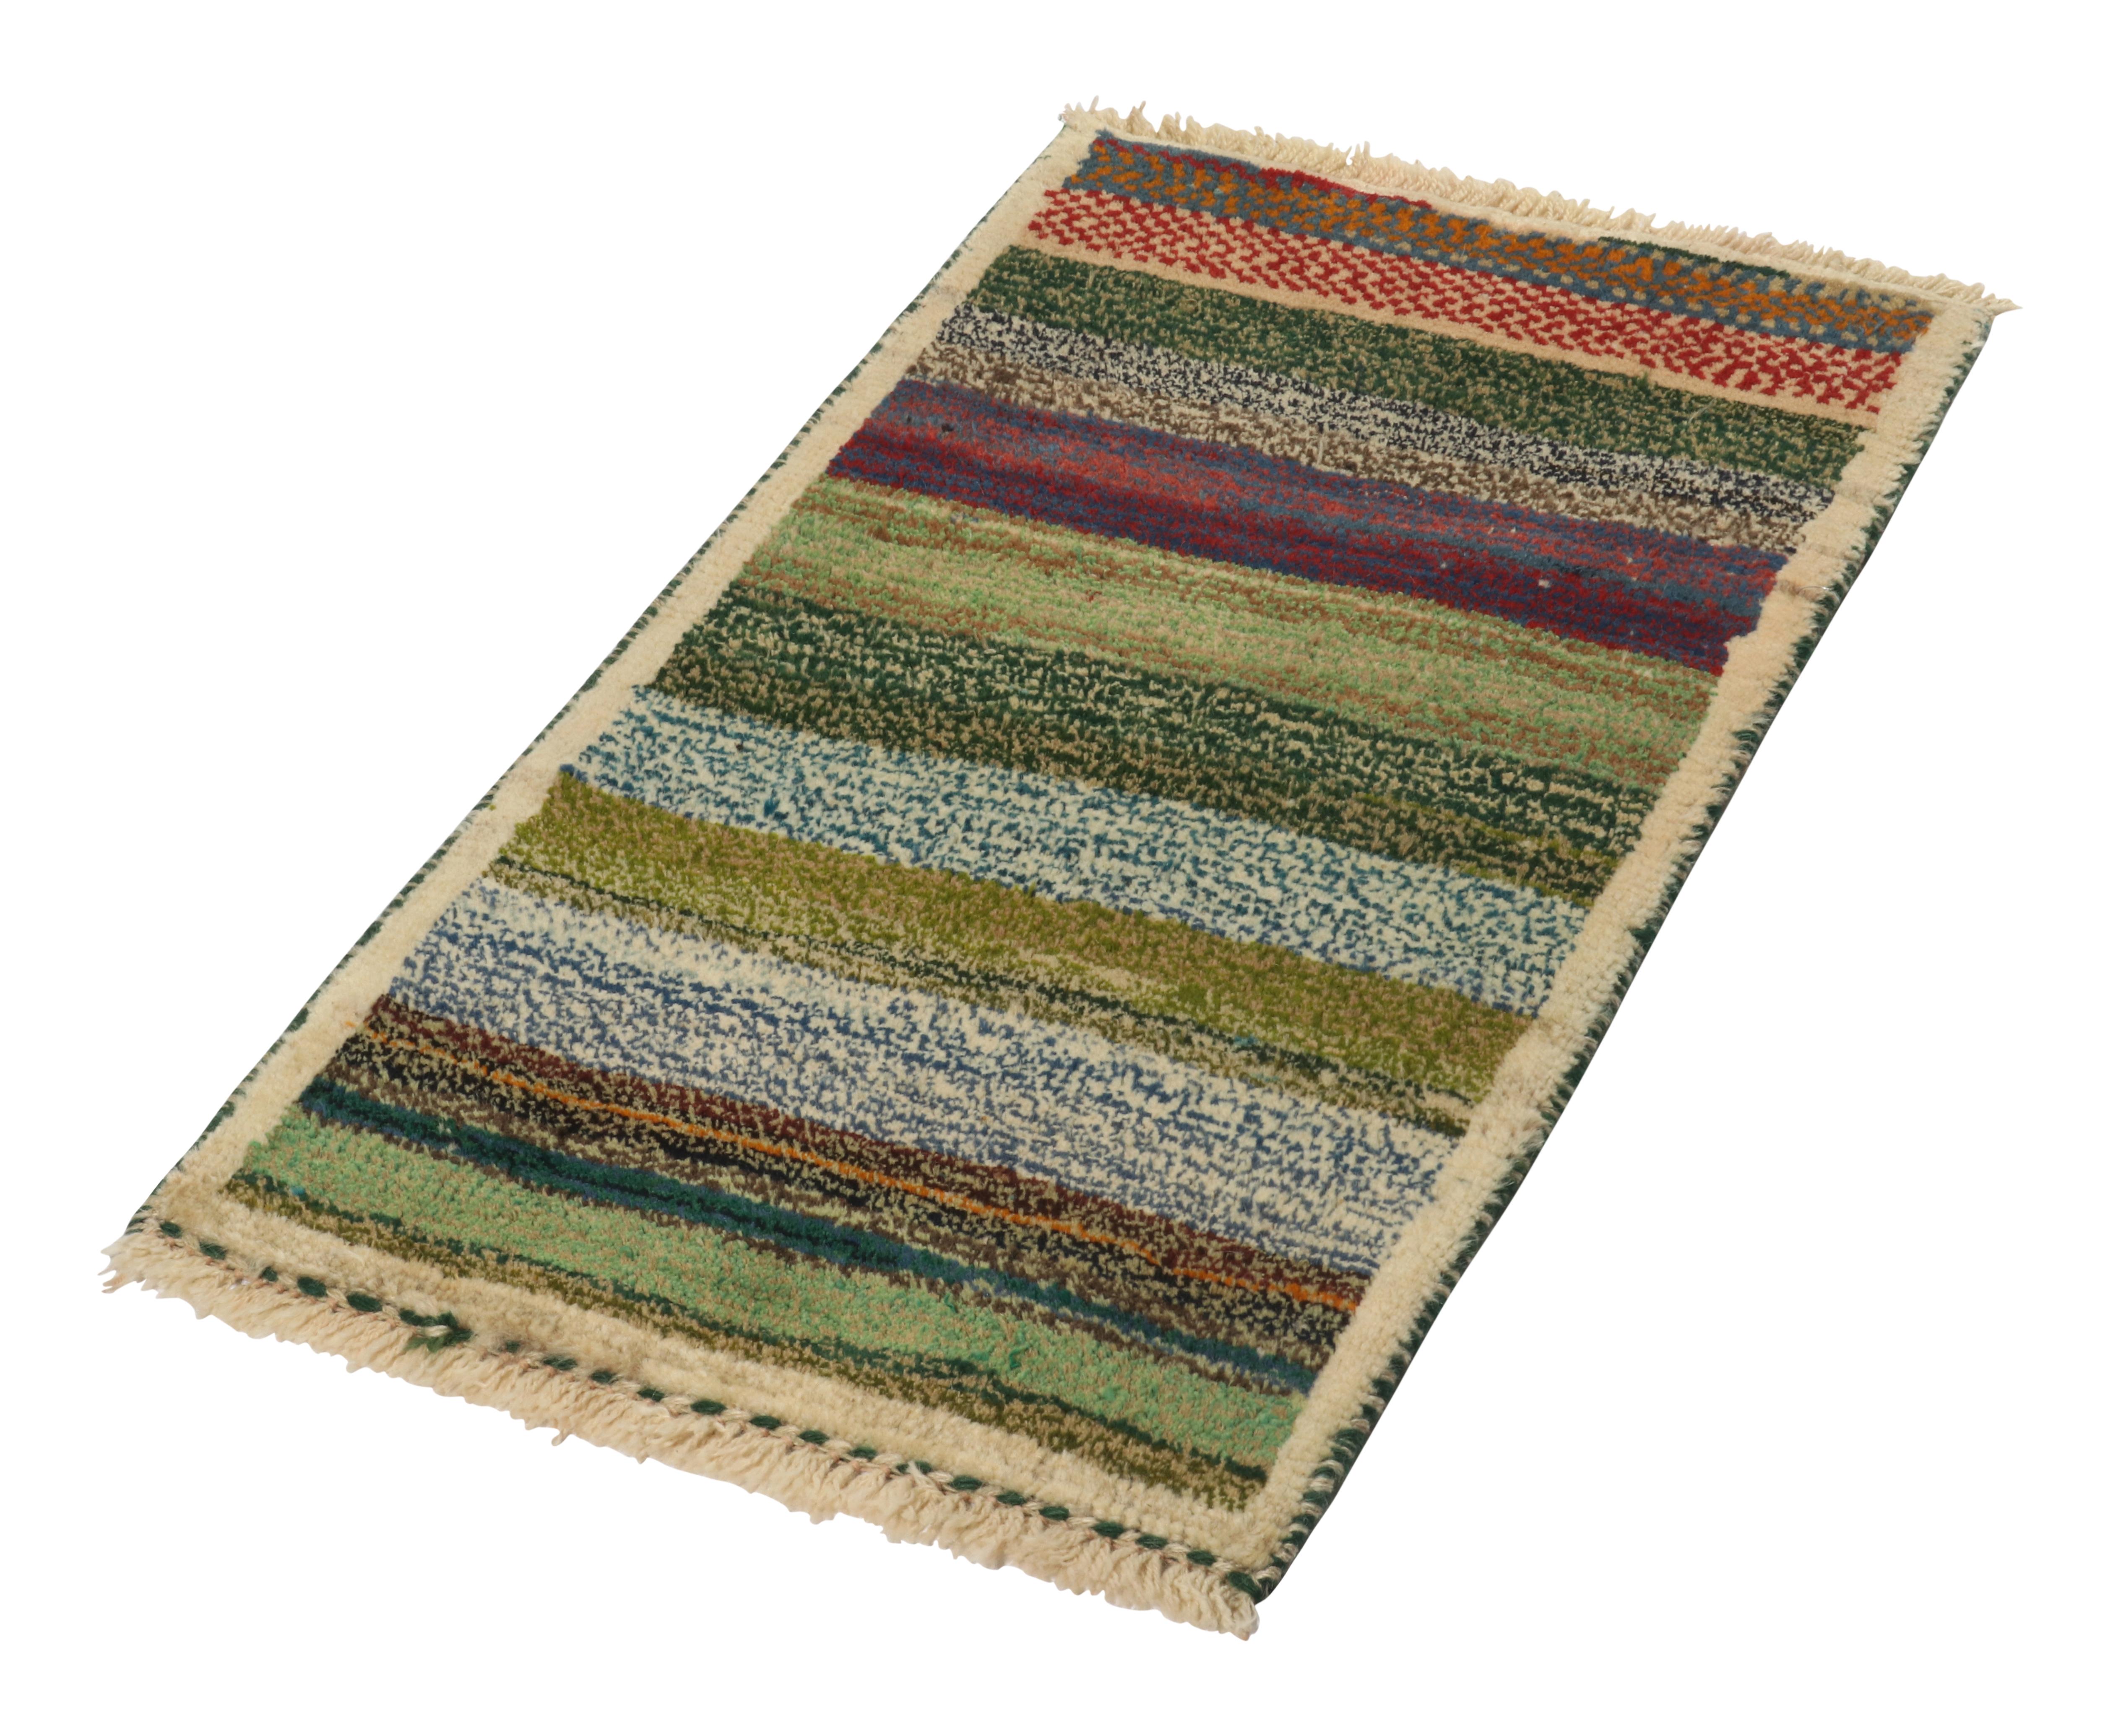 A vintage 2x3 Persian Gabbeh rug of grand entry to Rug & Kilim’s newest curation of rare tribal pieces. Hand-knotted in wool circa 1950-1960. 

On the Design:

This mid-century piece enjoys stripes in green, beige and blue in the more present